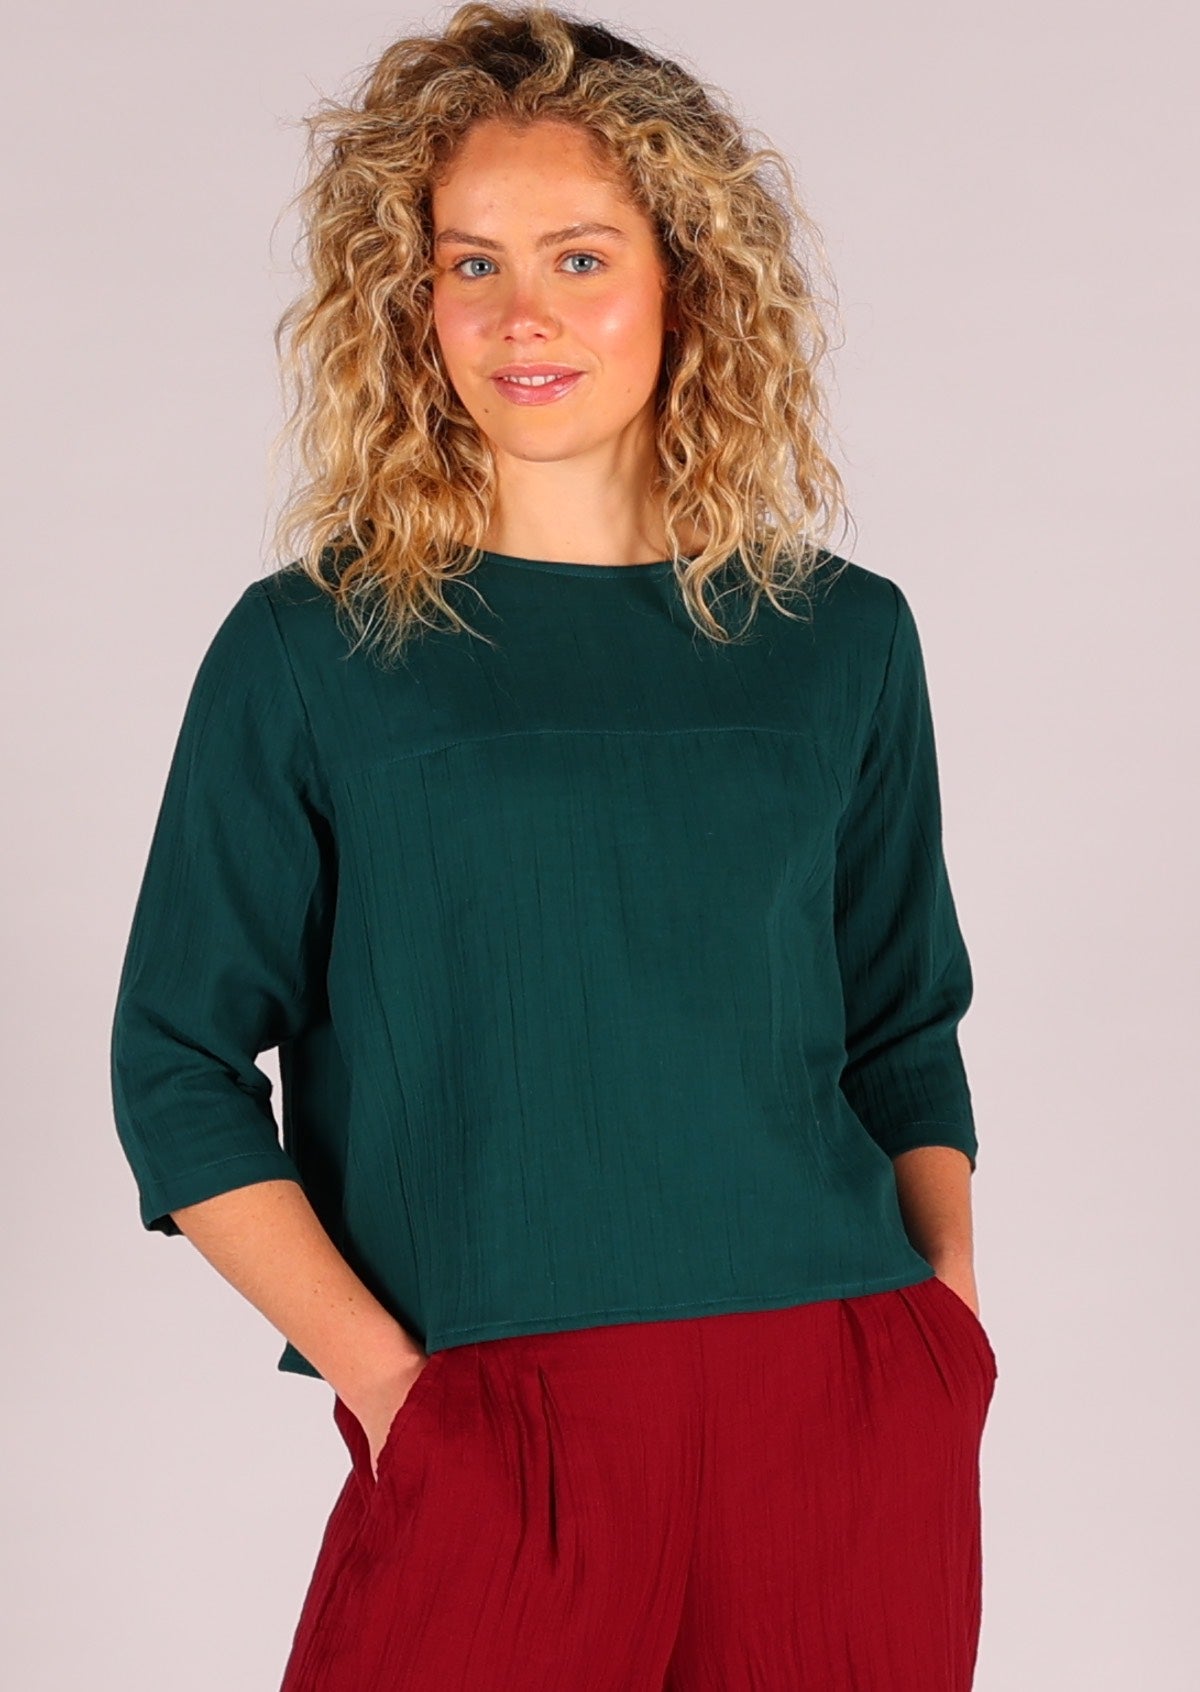 Double cotton top with 3/4 sleeves and high round neckline